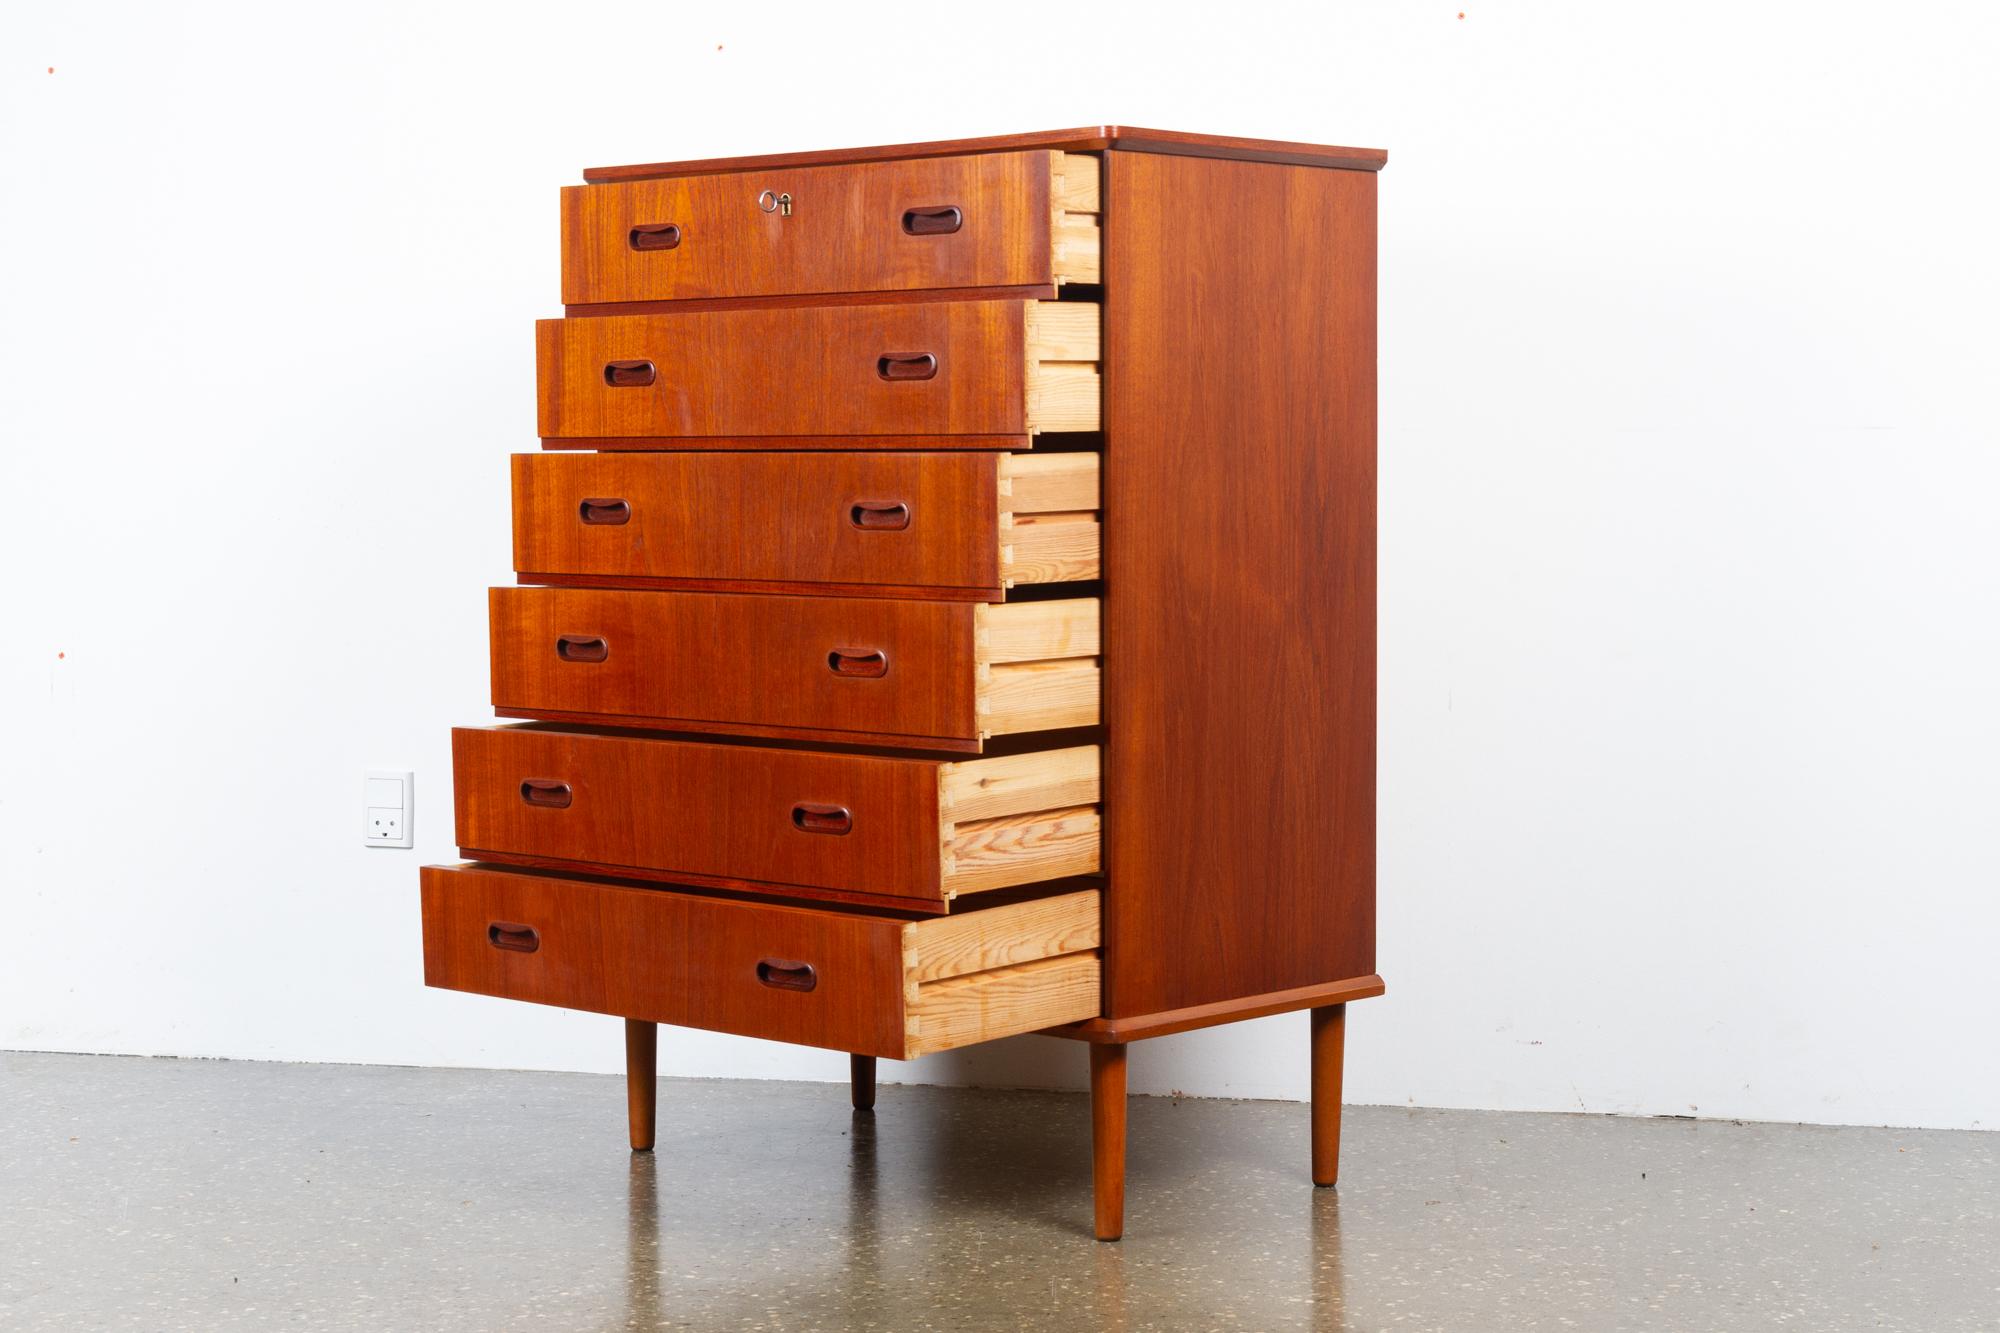 Vintage Danish teak dresser with 6 drawers, 1960s
Elegant Danish modern chest of drawers in beautiful teak veneer with oak frame and round tapered legs. Six large drawers with sculpted pulls in solid teak. Top drawers has a lock and key. Varm and